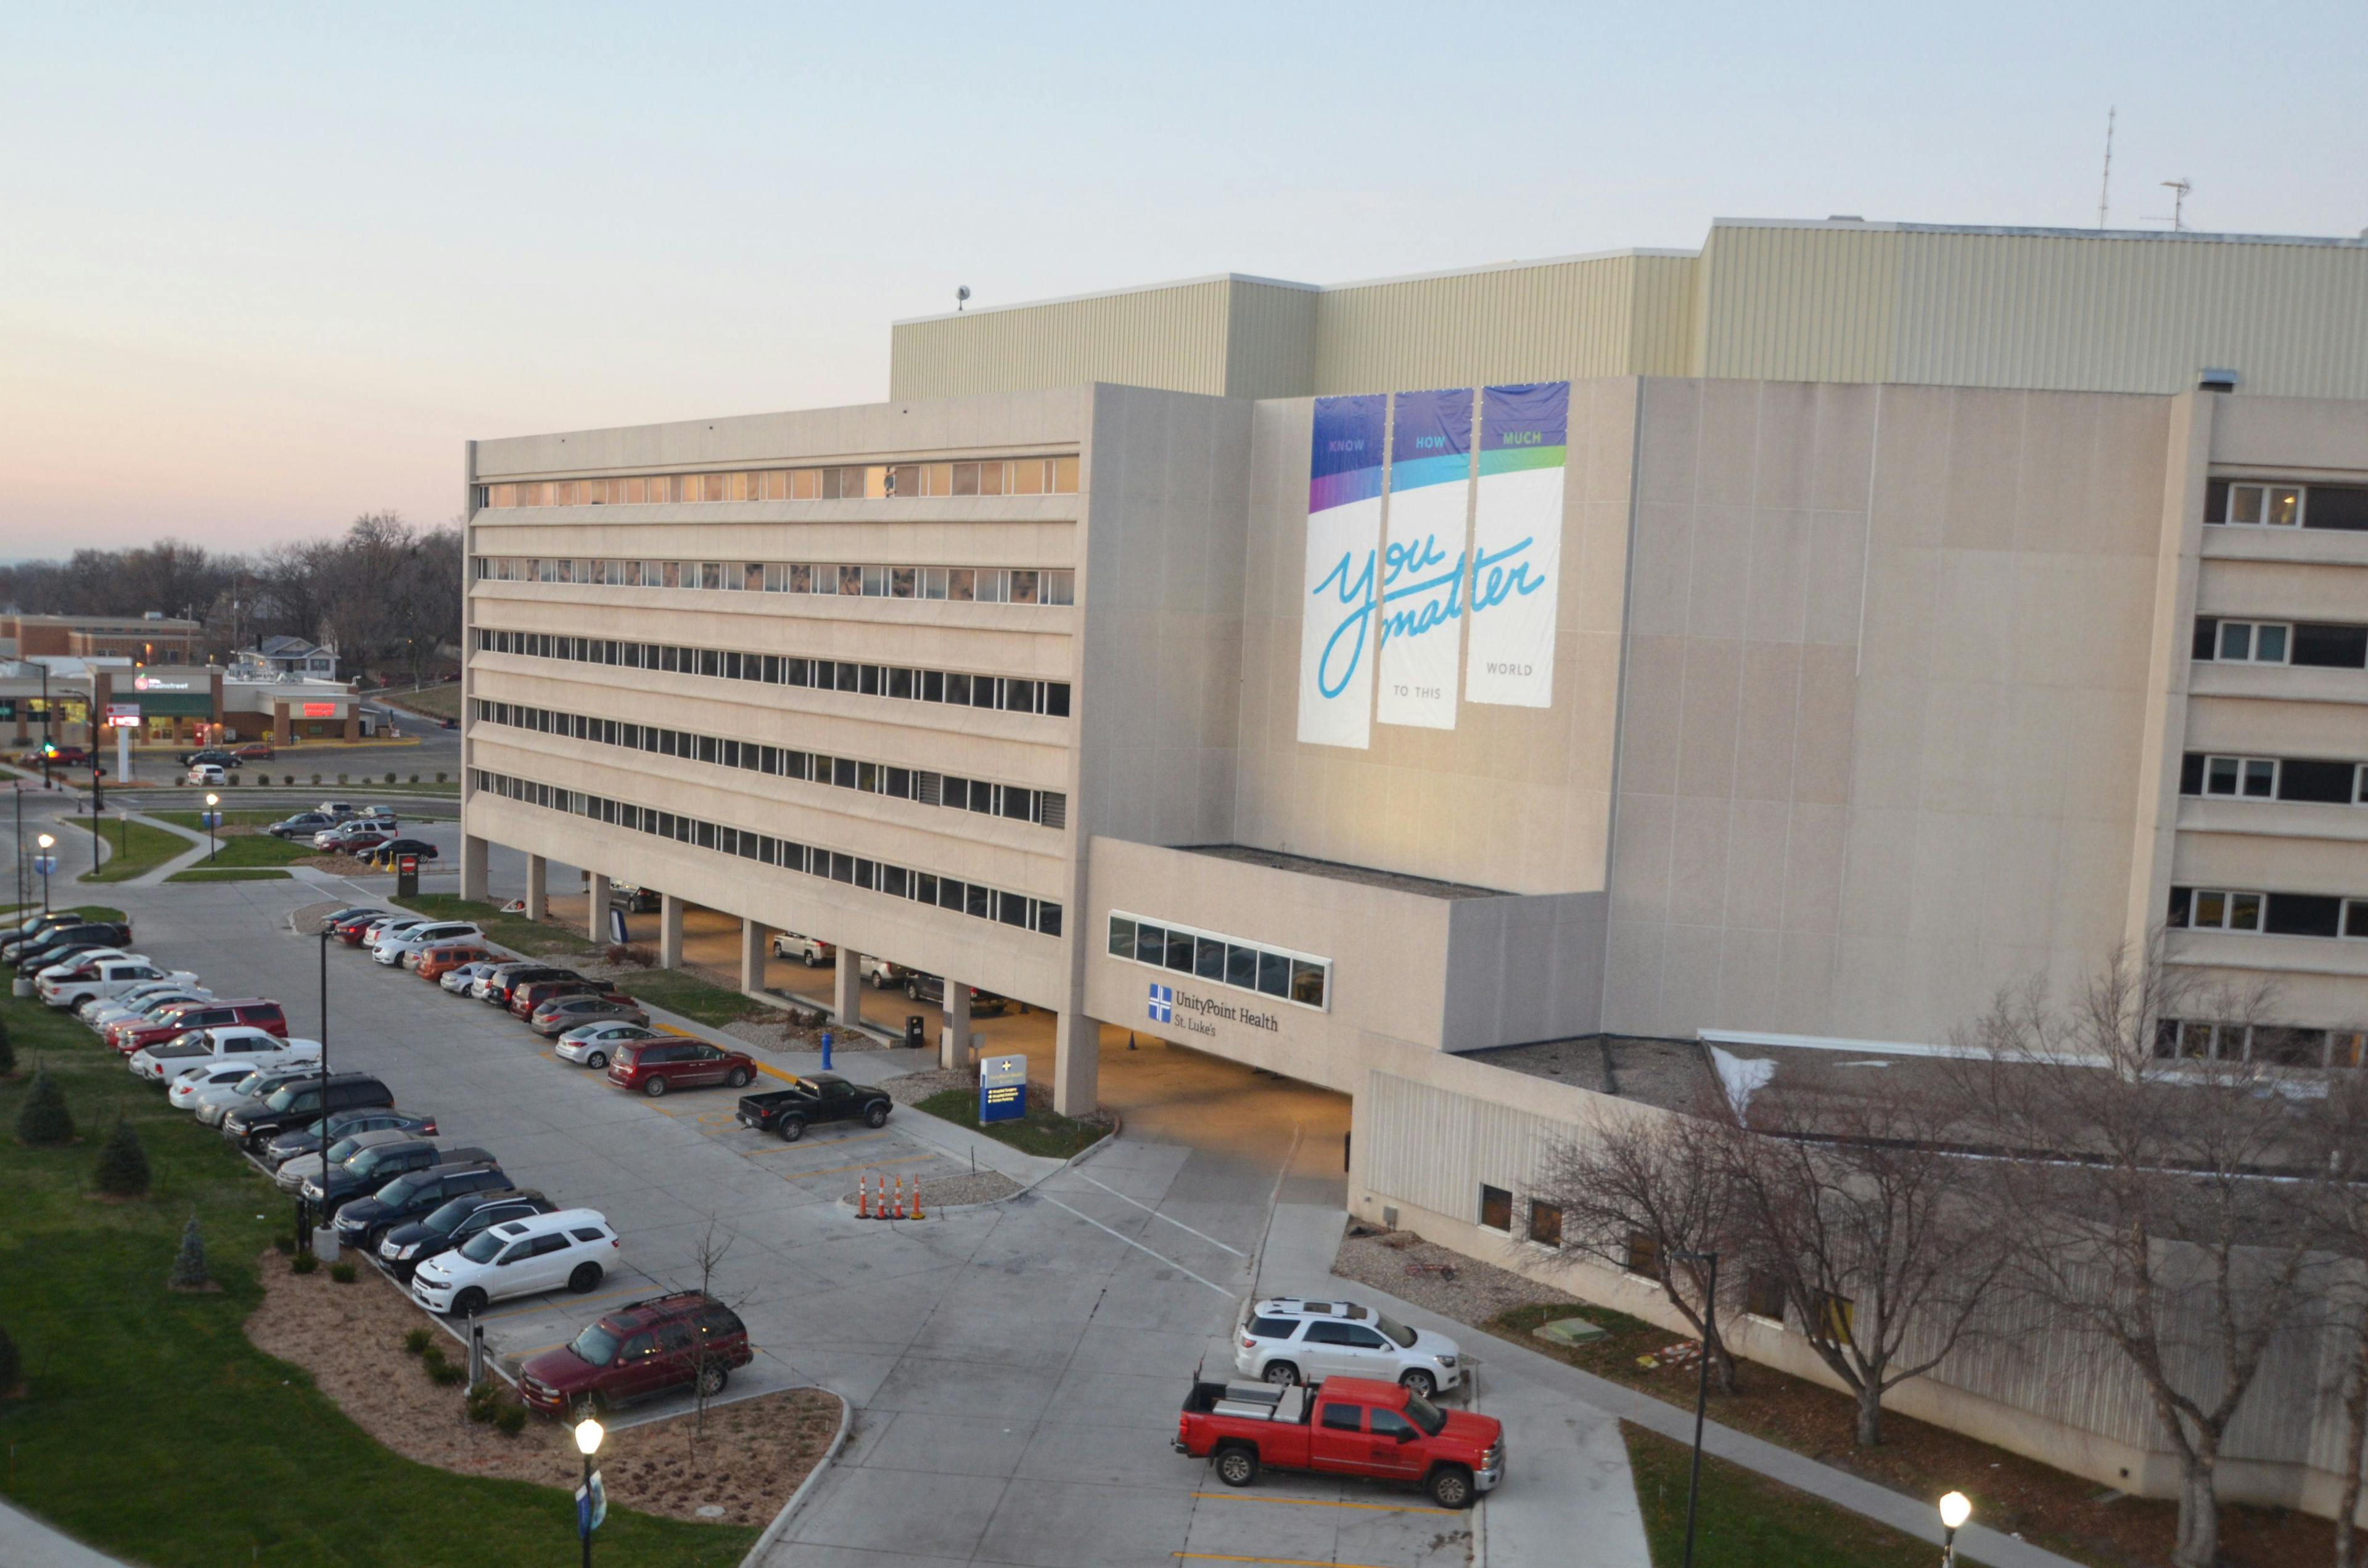 UnityPoint Health and Presbyterian Healthcare Services say they are considering a merger. If they join forces, the new organization would operate more than 40 hospitals, including UnityPoint Health Sioux City, above. (Photo: UnityPoint Health).